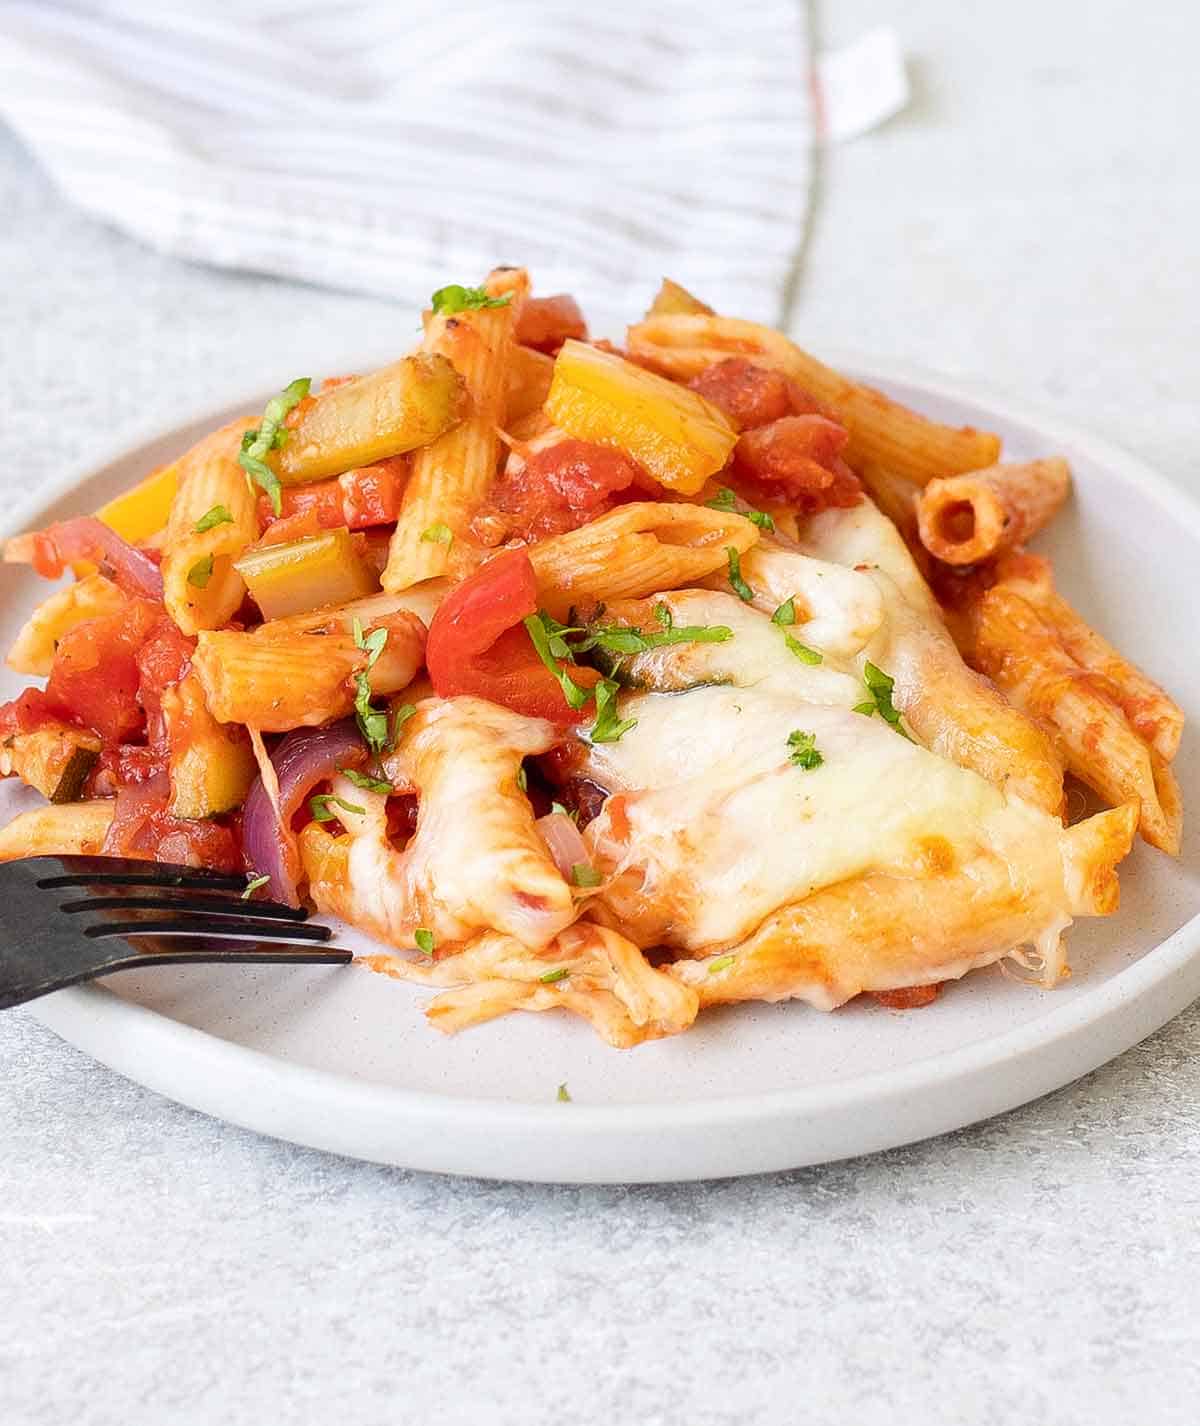 a plate of baked pasta with veggies